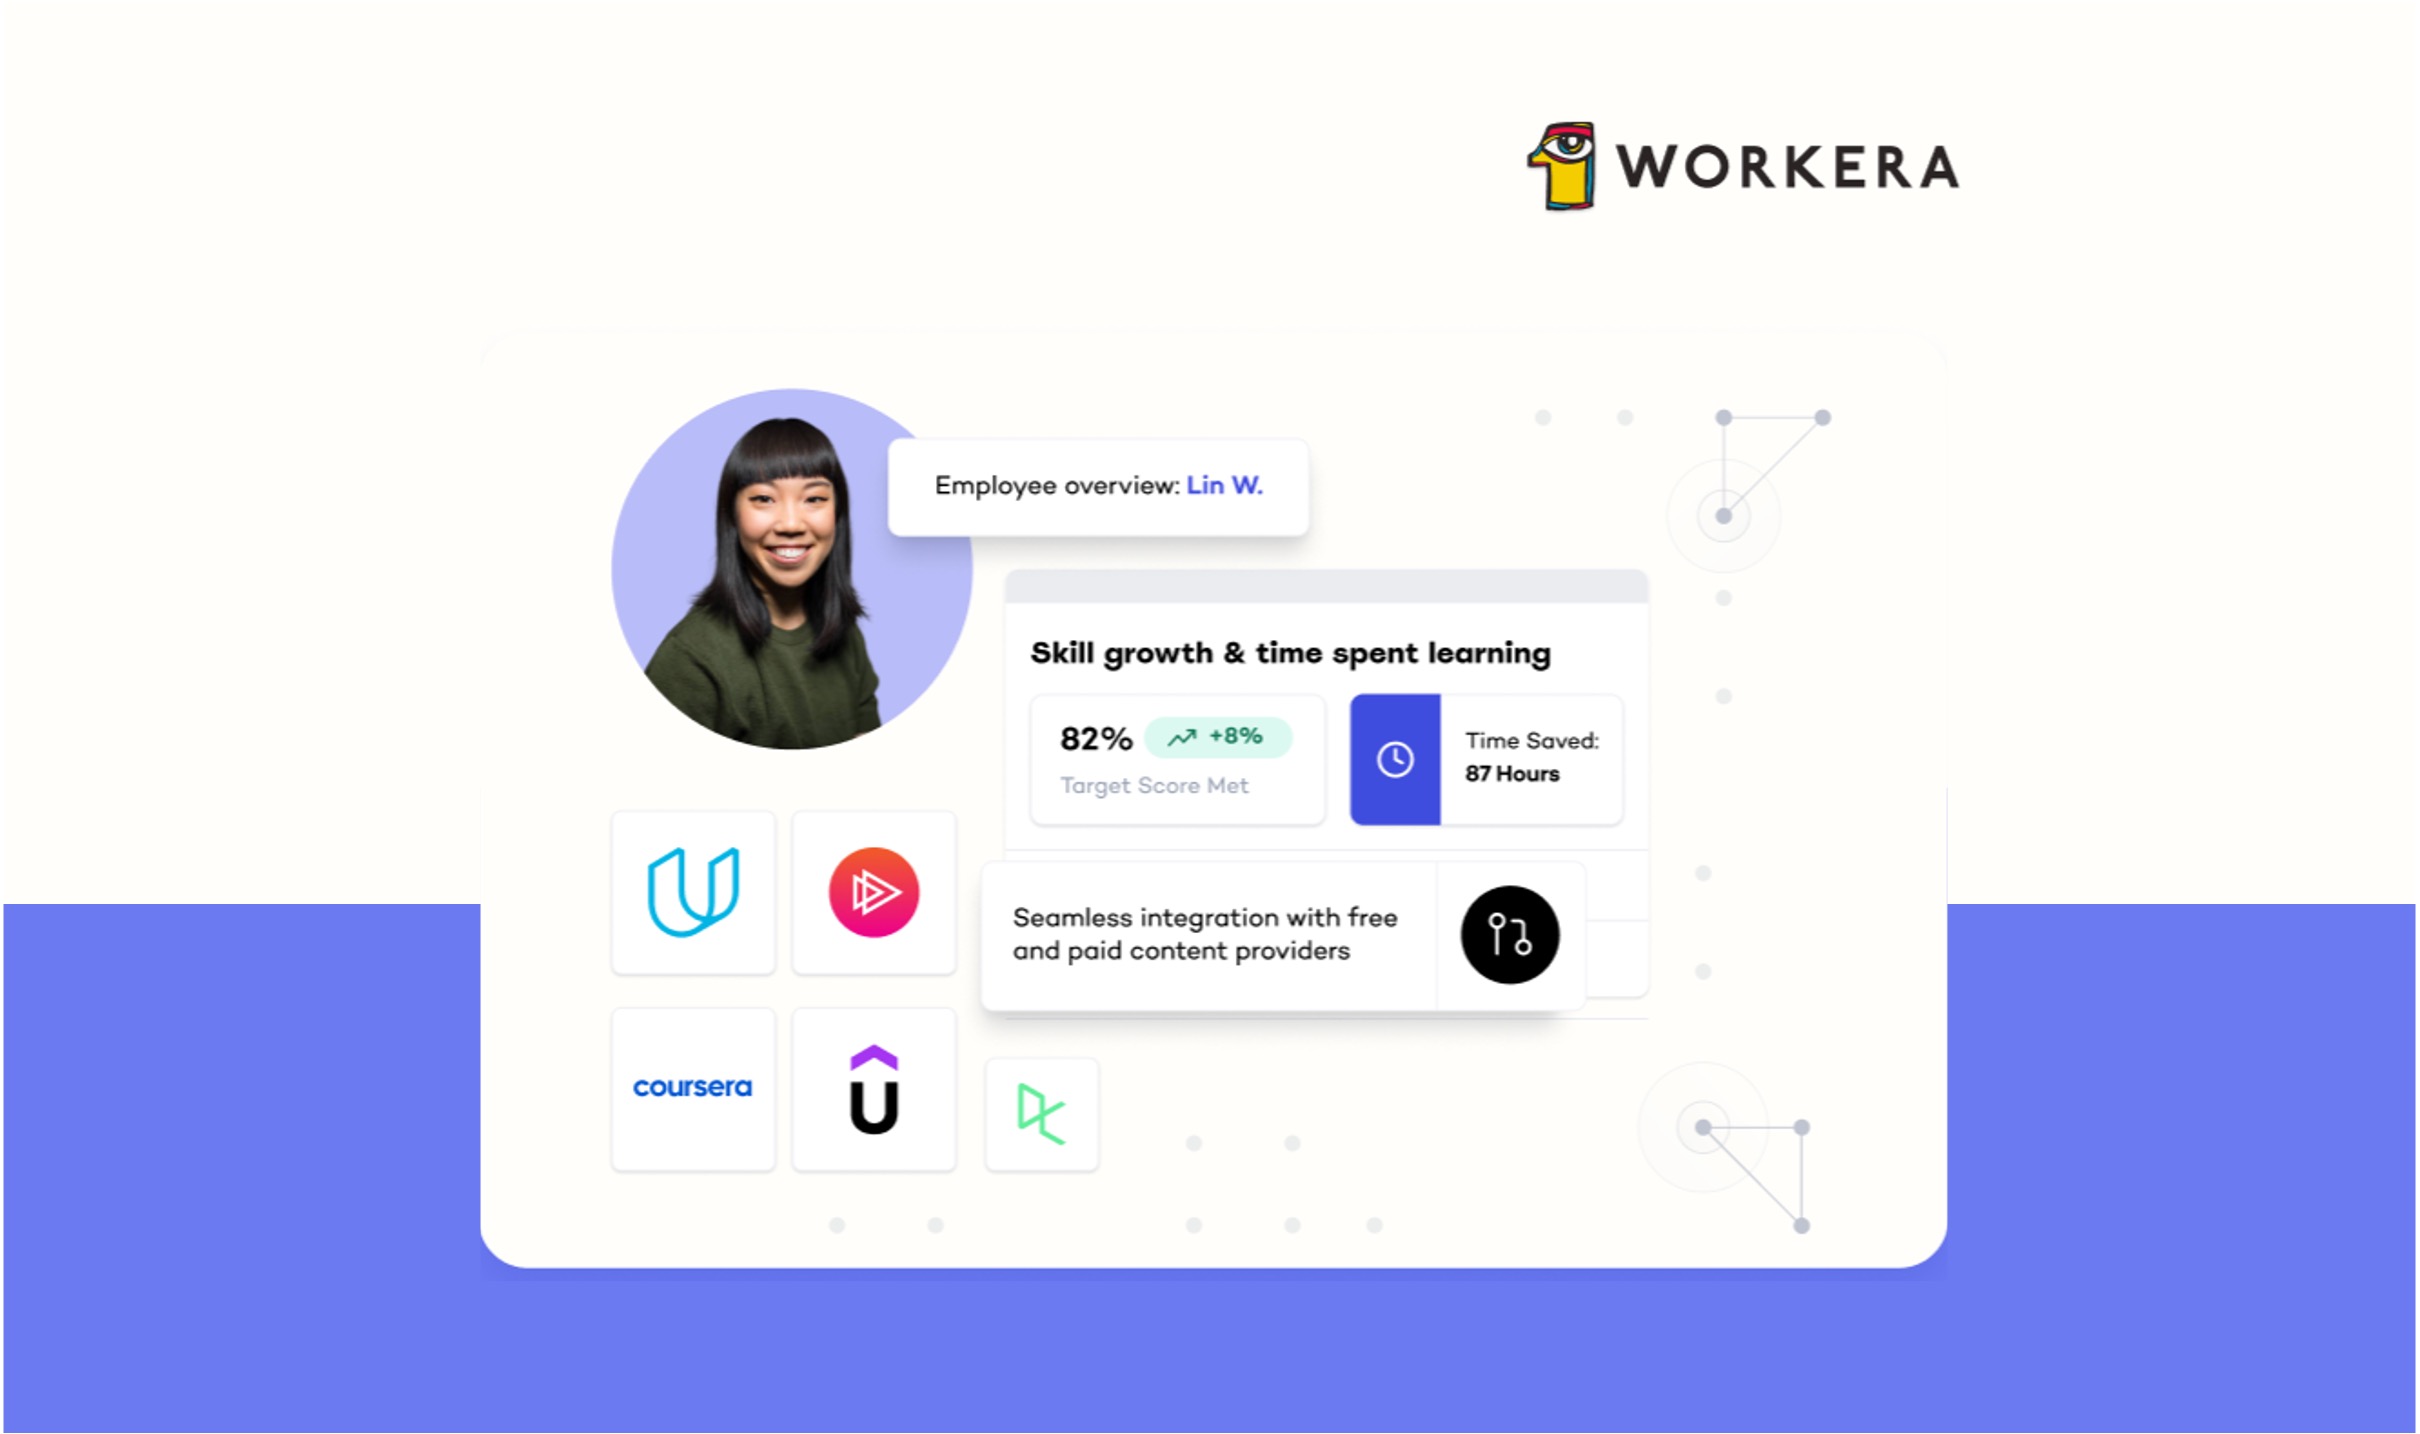 See the newest enhancements to Workera's learning experience